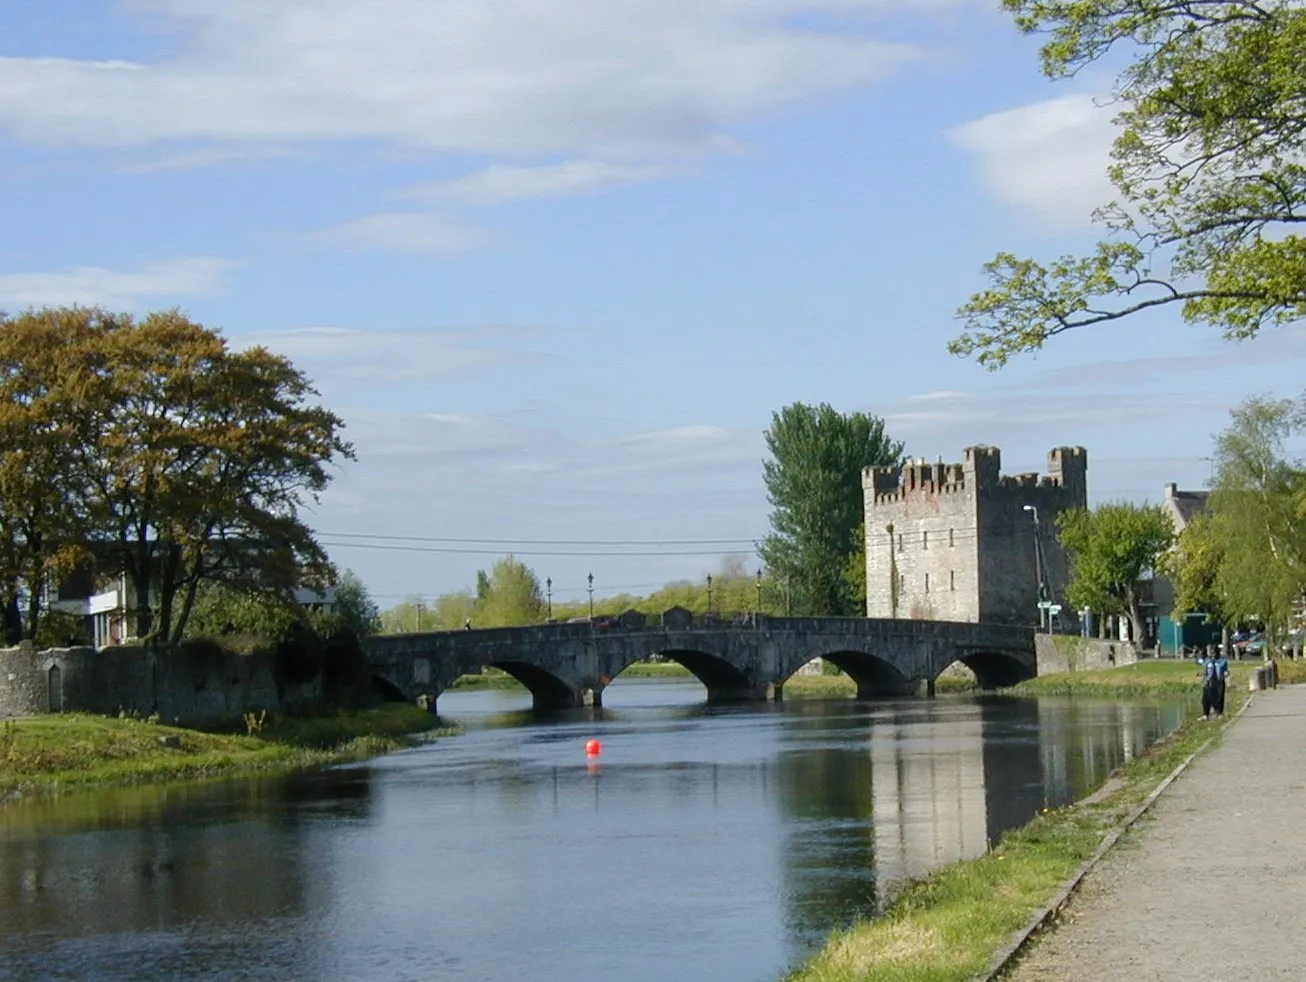 Photo showing: Crom Abu Bridge and White's Castle, a tower house built in 1417 by the Gerald FitzGerald, 8th Earl of Kildare